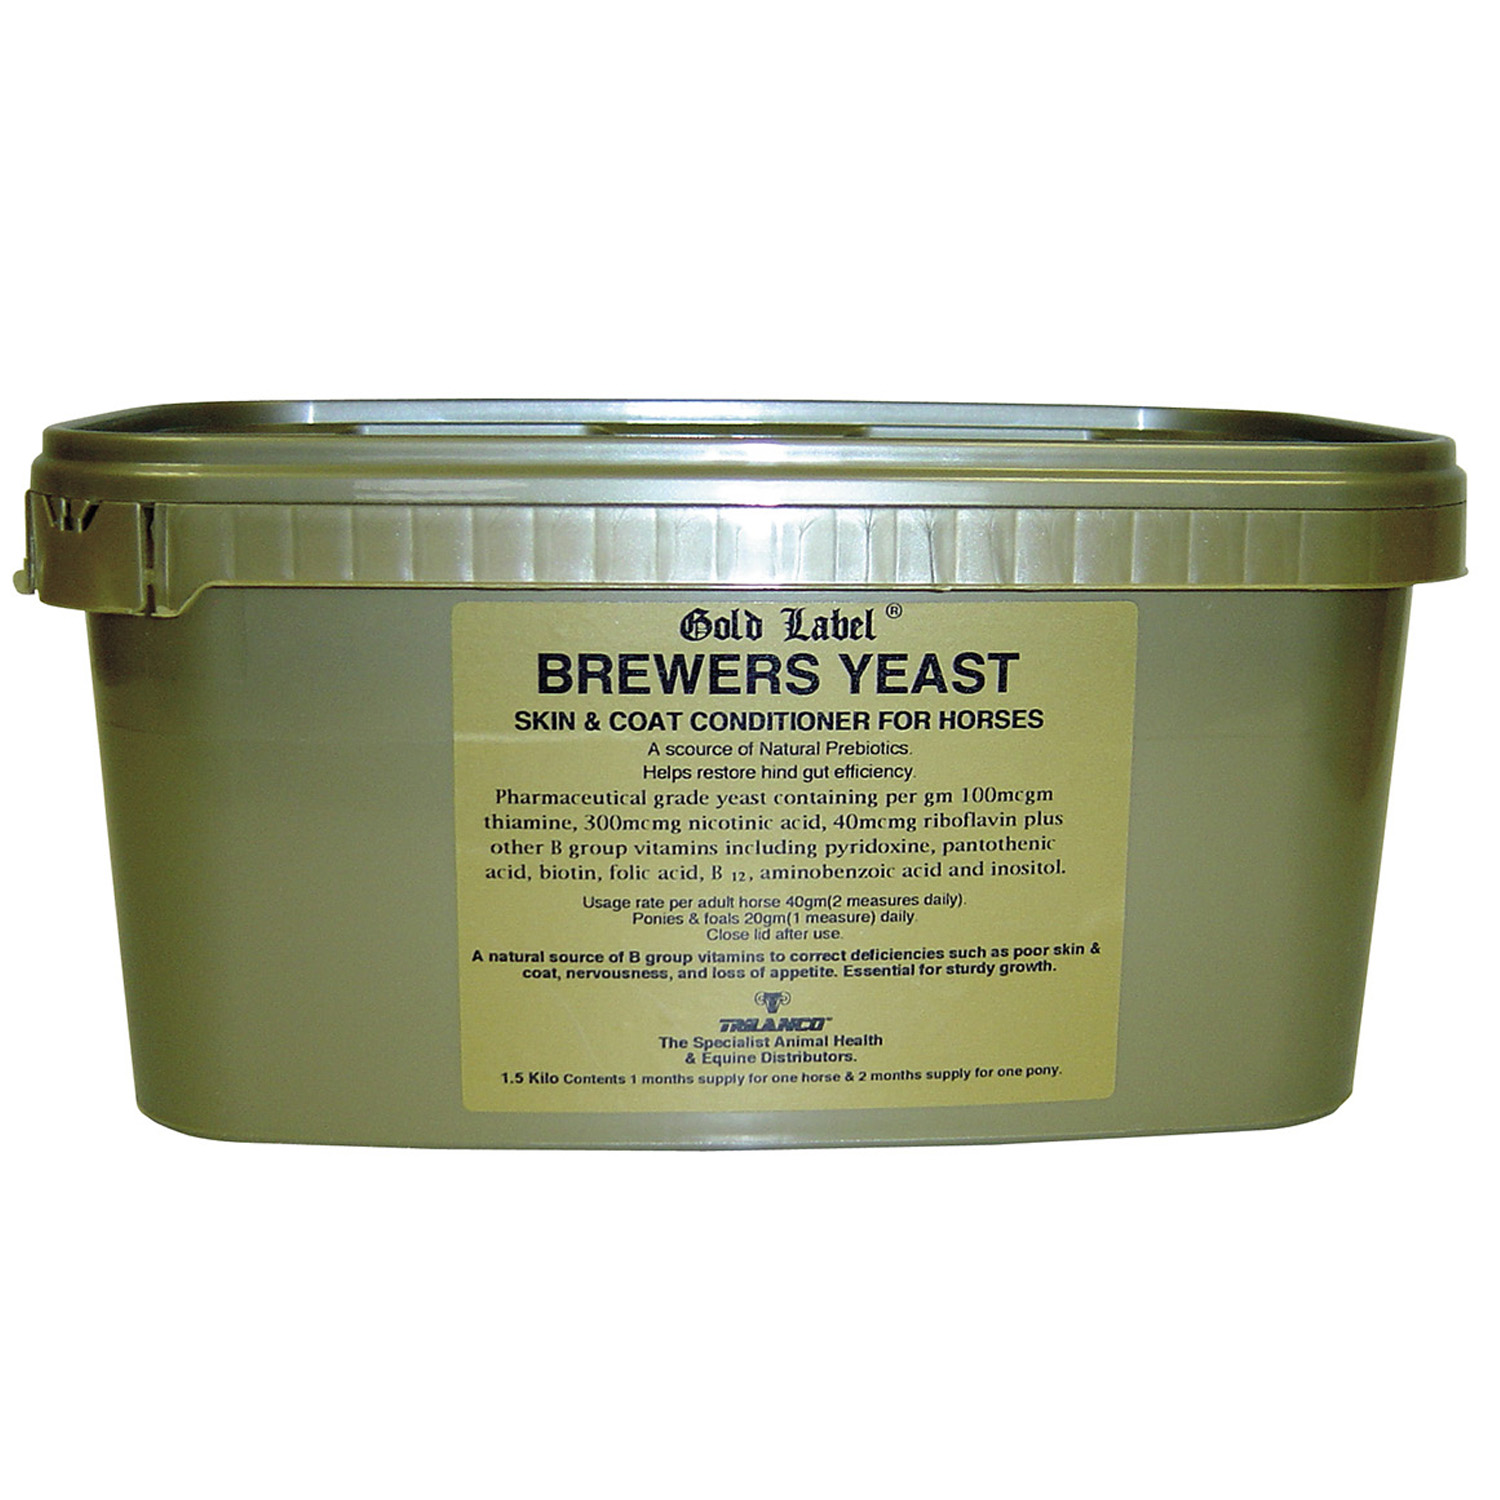 GOLD LABEL BREWERS YEAST 1.5 KG 1.5 KG